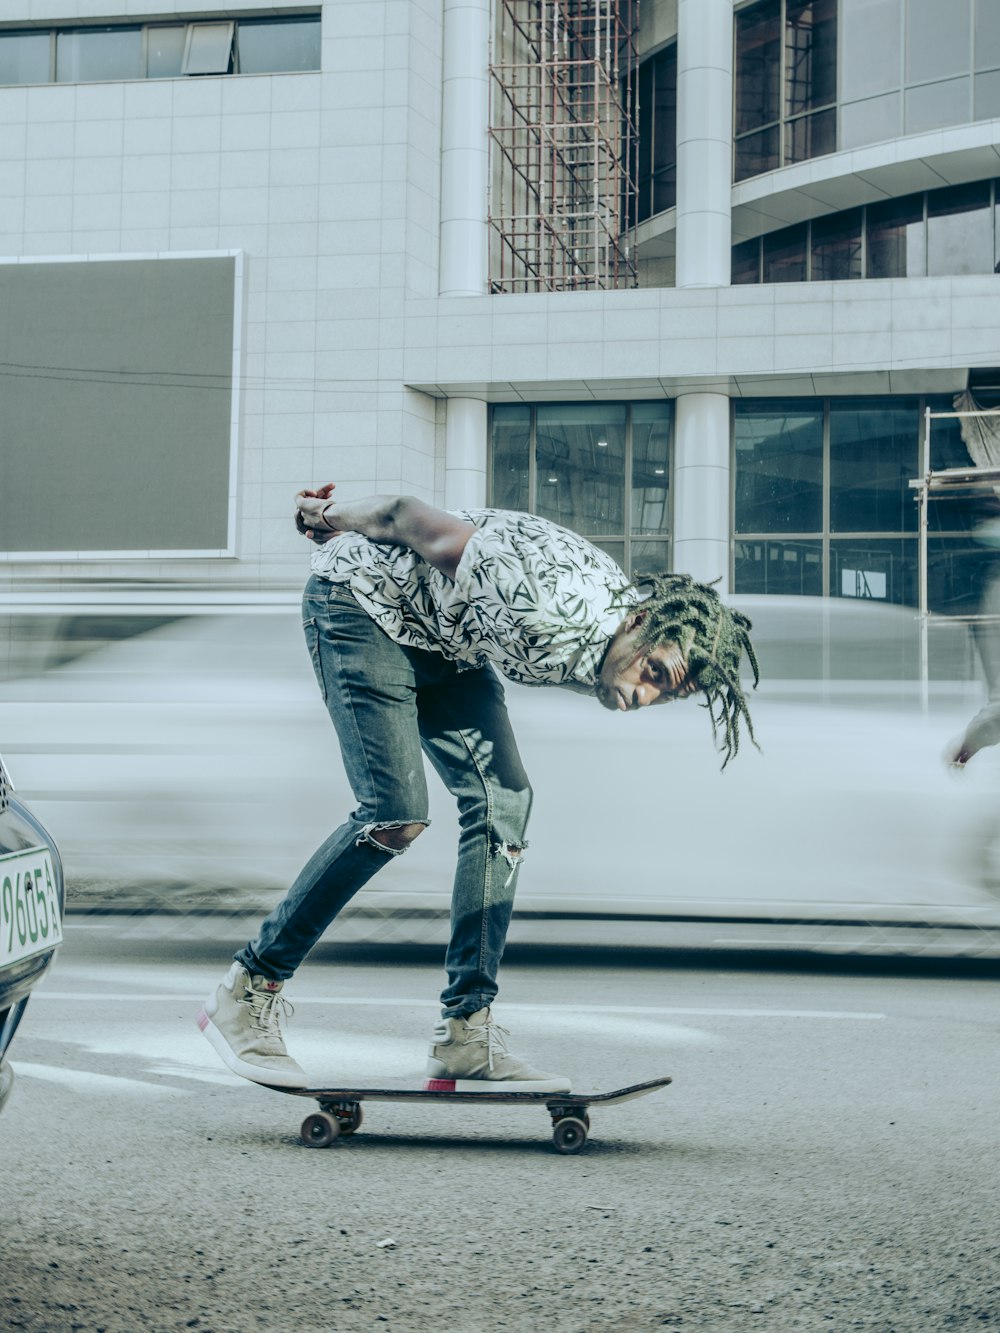 man in grey and black camouflage shirt and blue denim jeans riding black skateboard during daytime